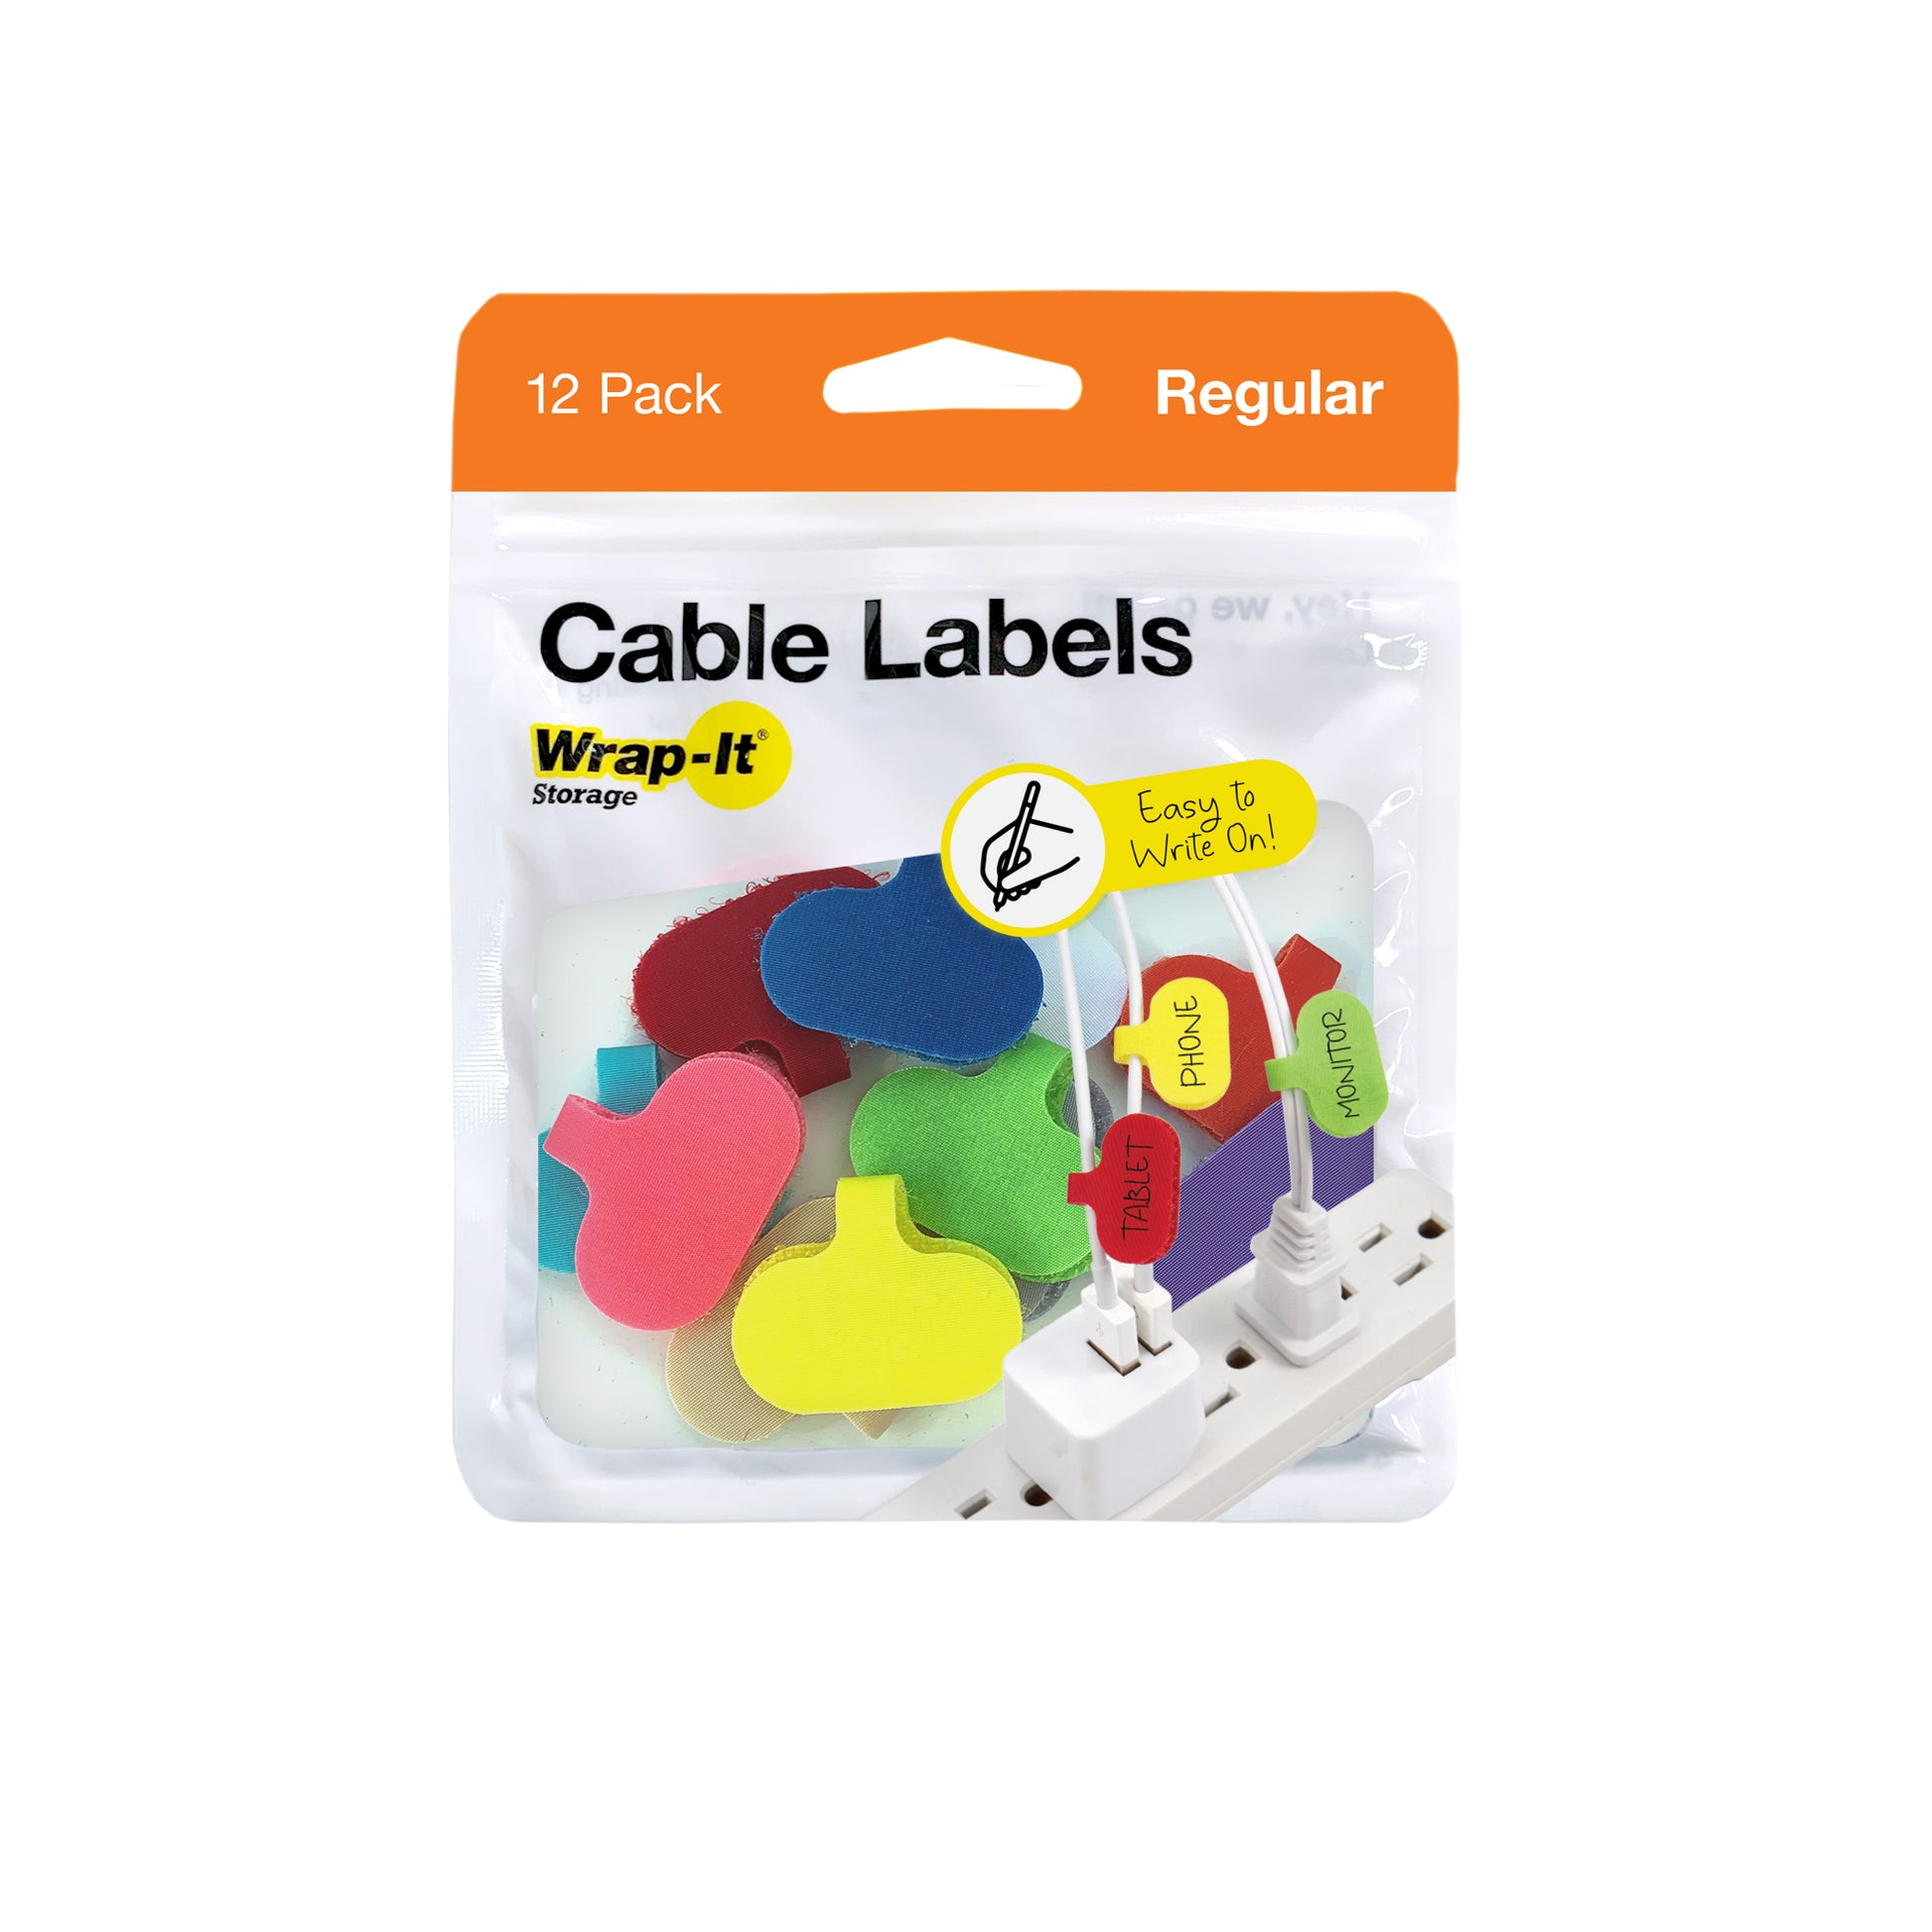 Cable Labels - Regular (12-Pack) - Wrap-It Storage